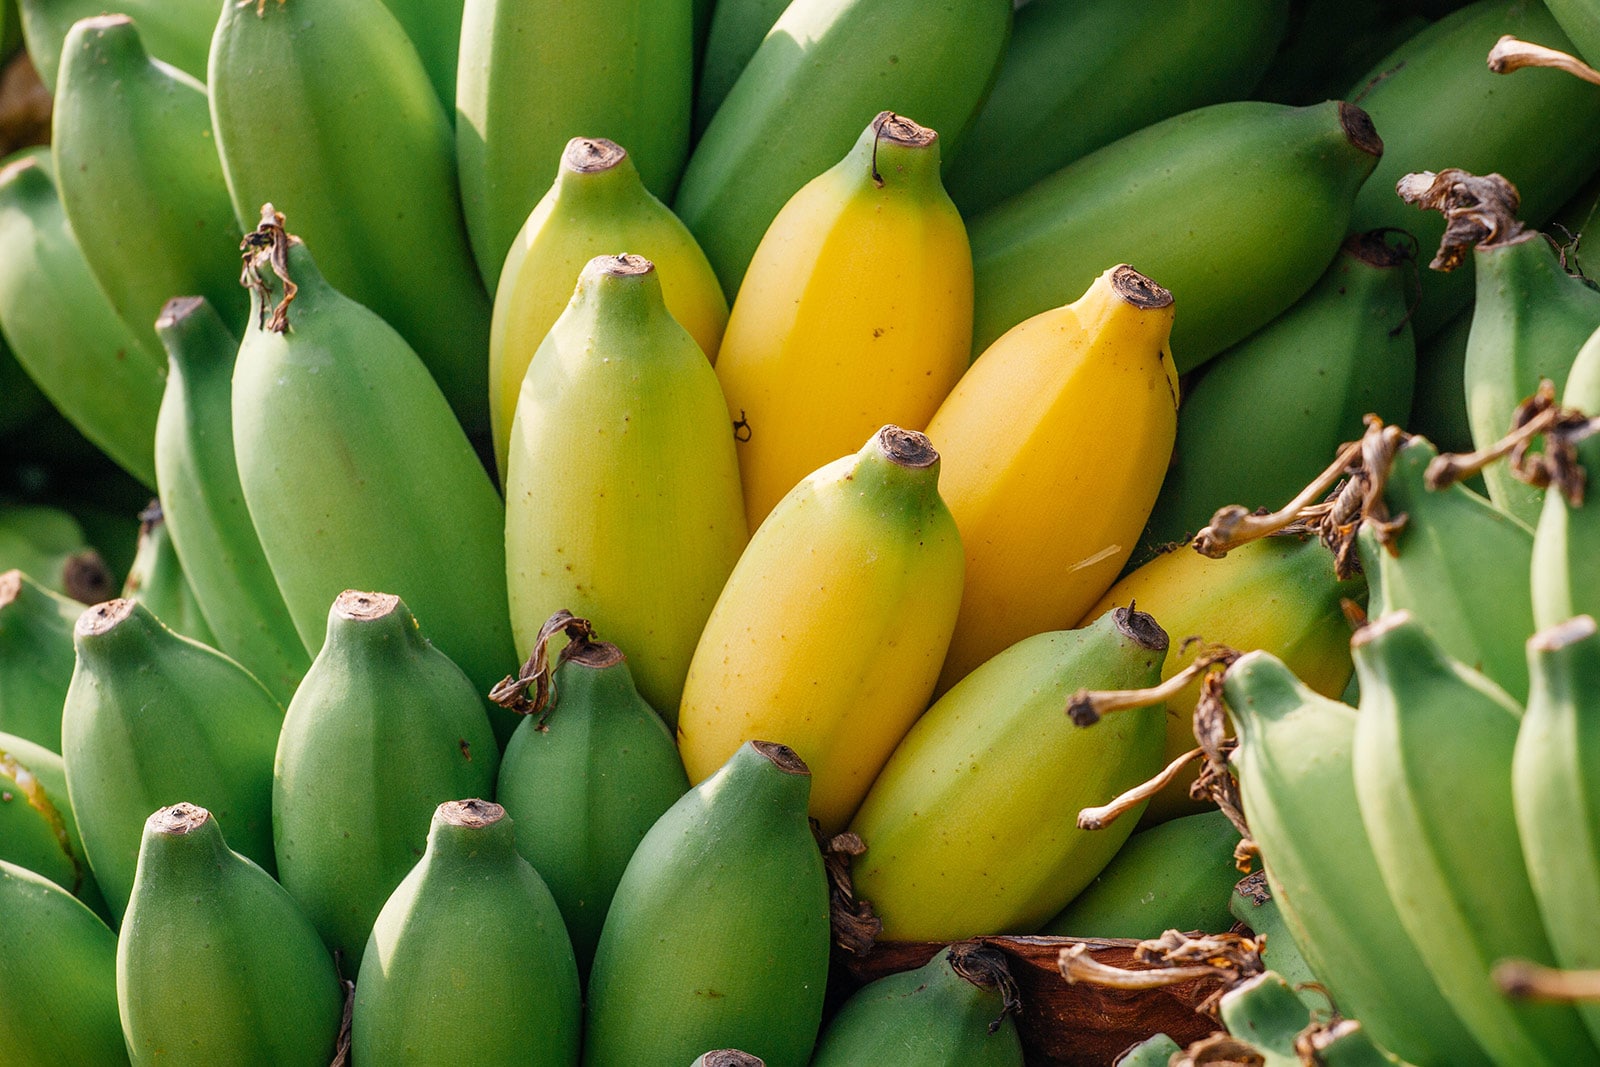 Close-up of green banana bunch with a few bananas turning yellow